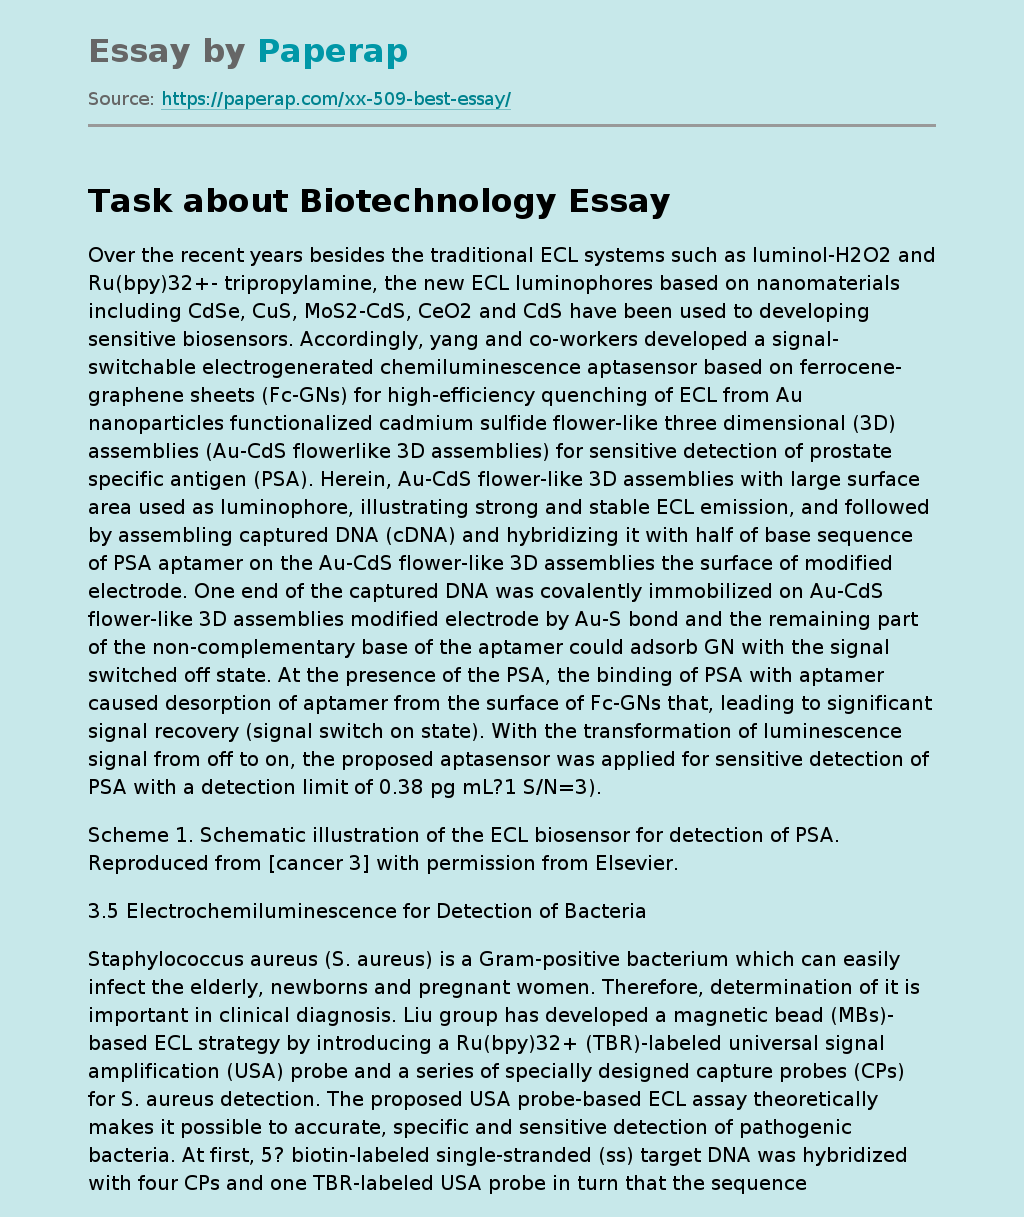 Task about Biotechnology